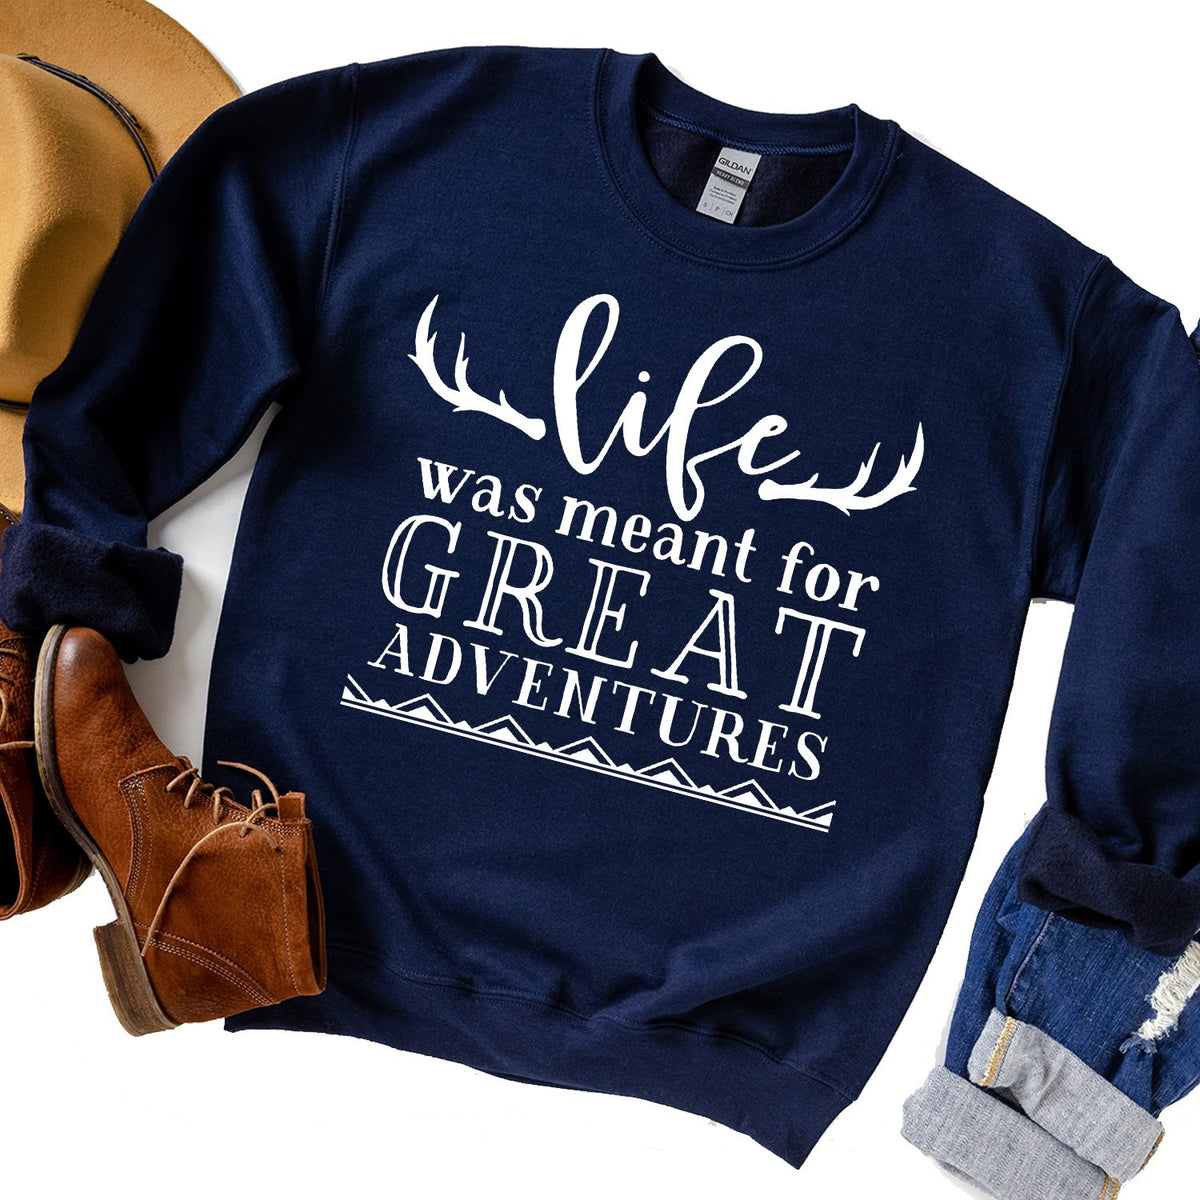 Life Was Meant For Great Adventure - Long Sleeve Heavy Crewneck Sweatshirt